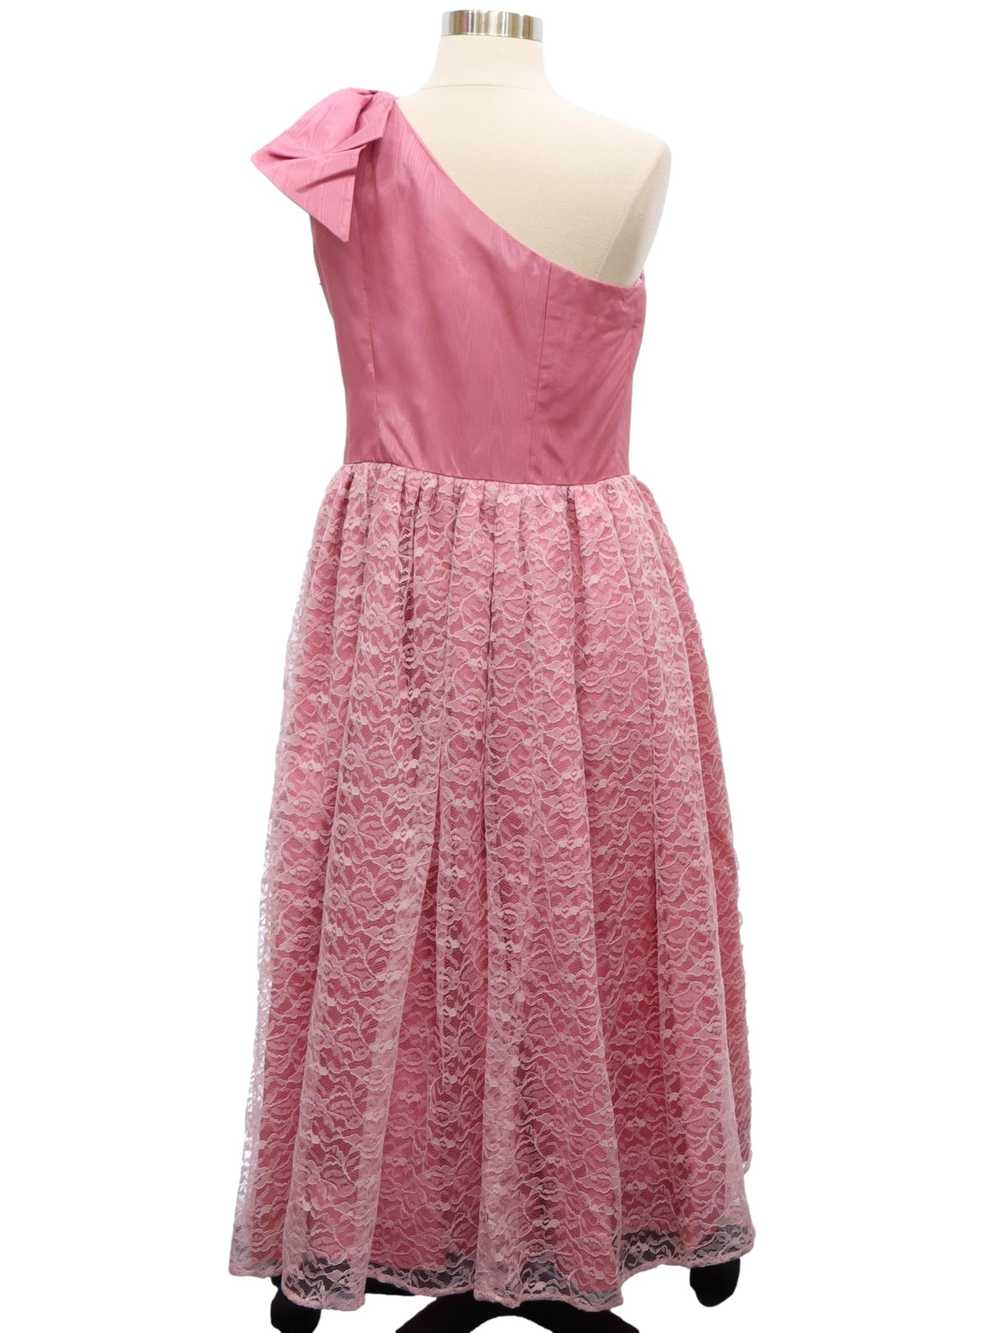 1980's Totally 80s Prom or Cocktail Dress - image 3